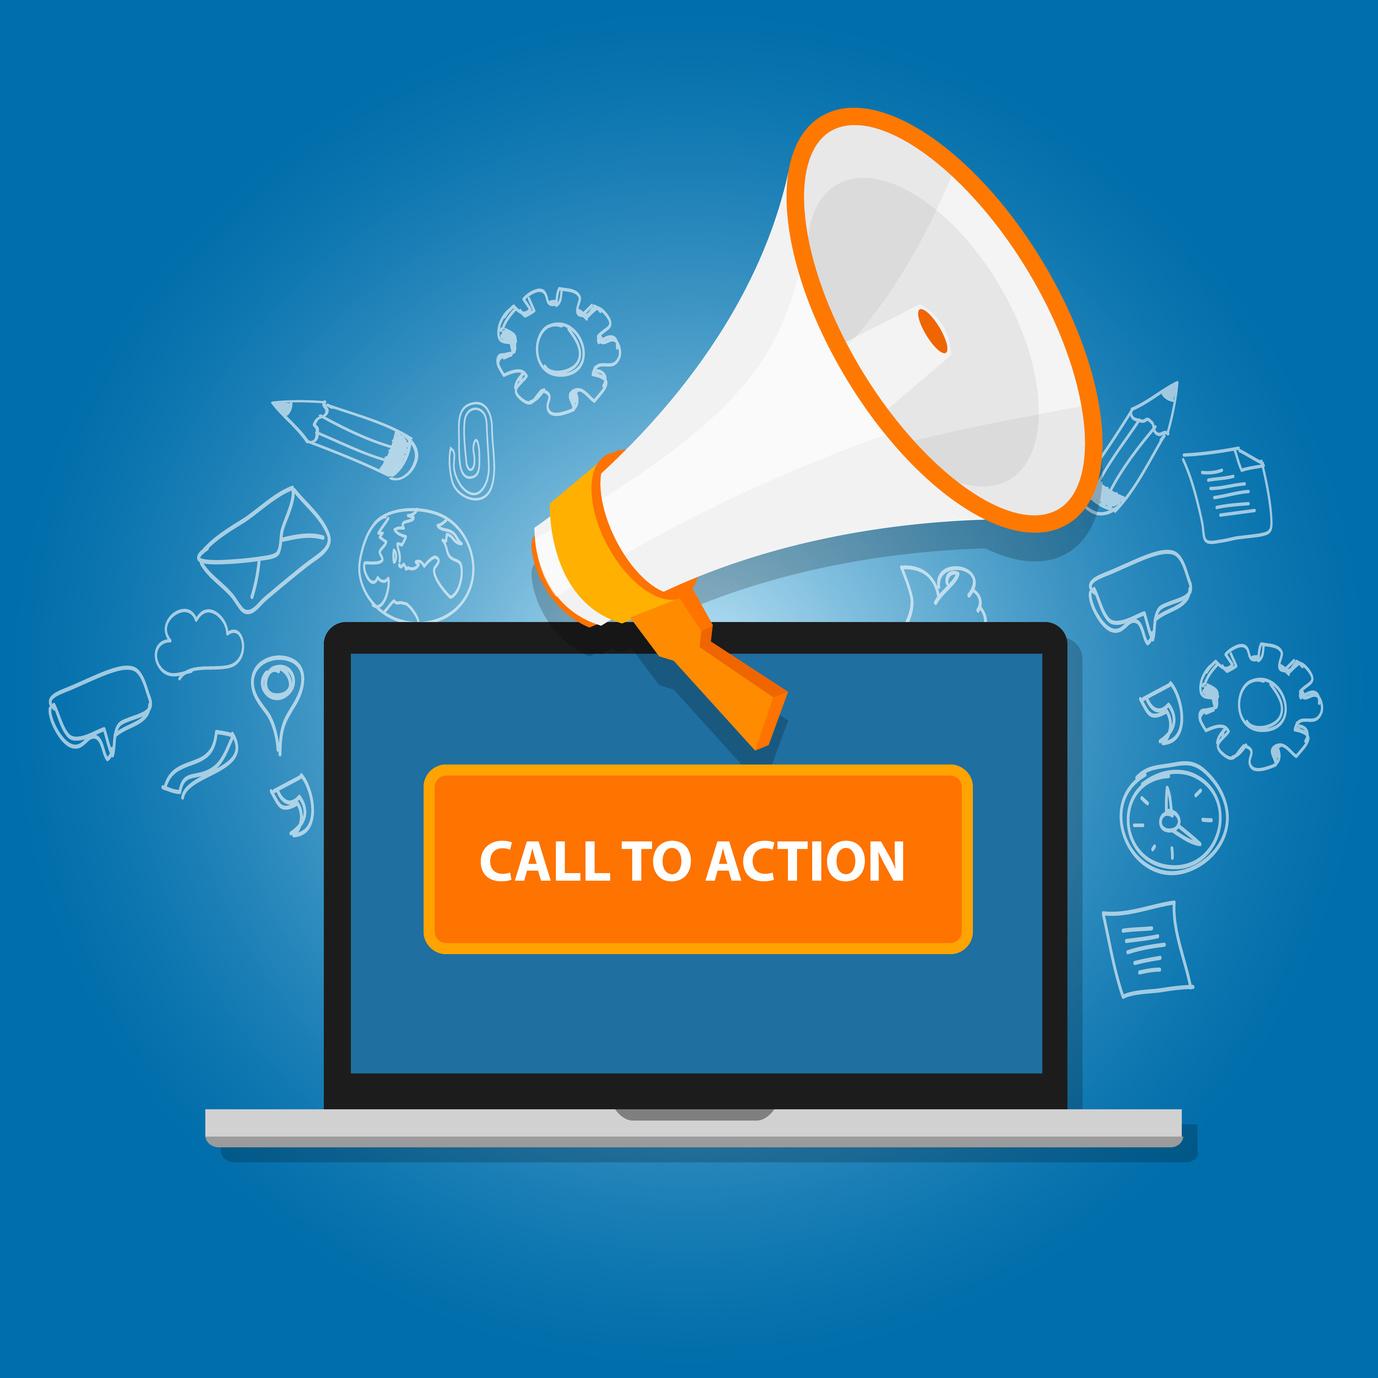 How to write effective CTAs (Call-To-Actions)